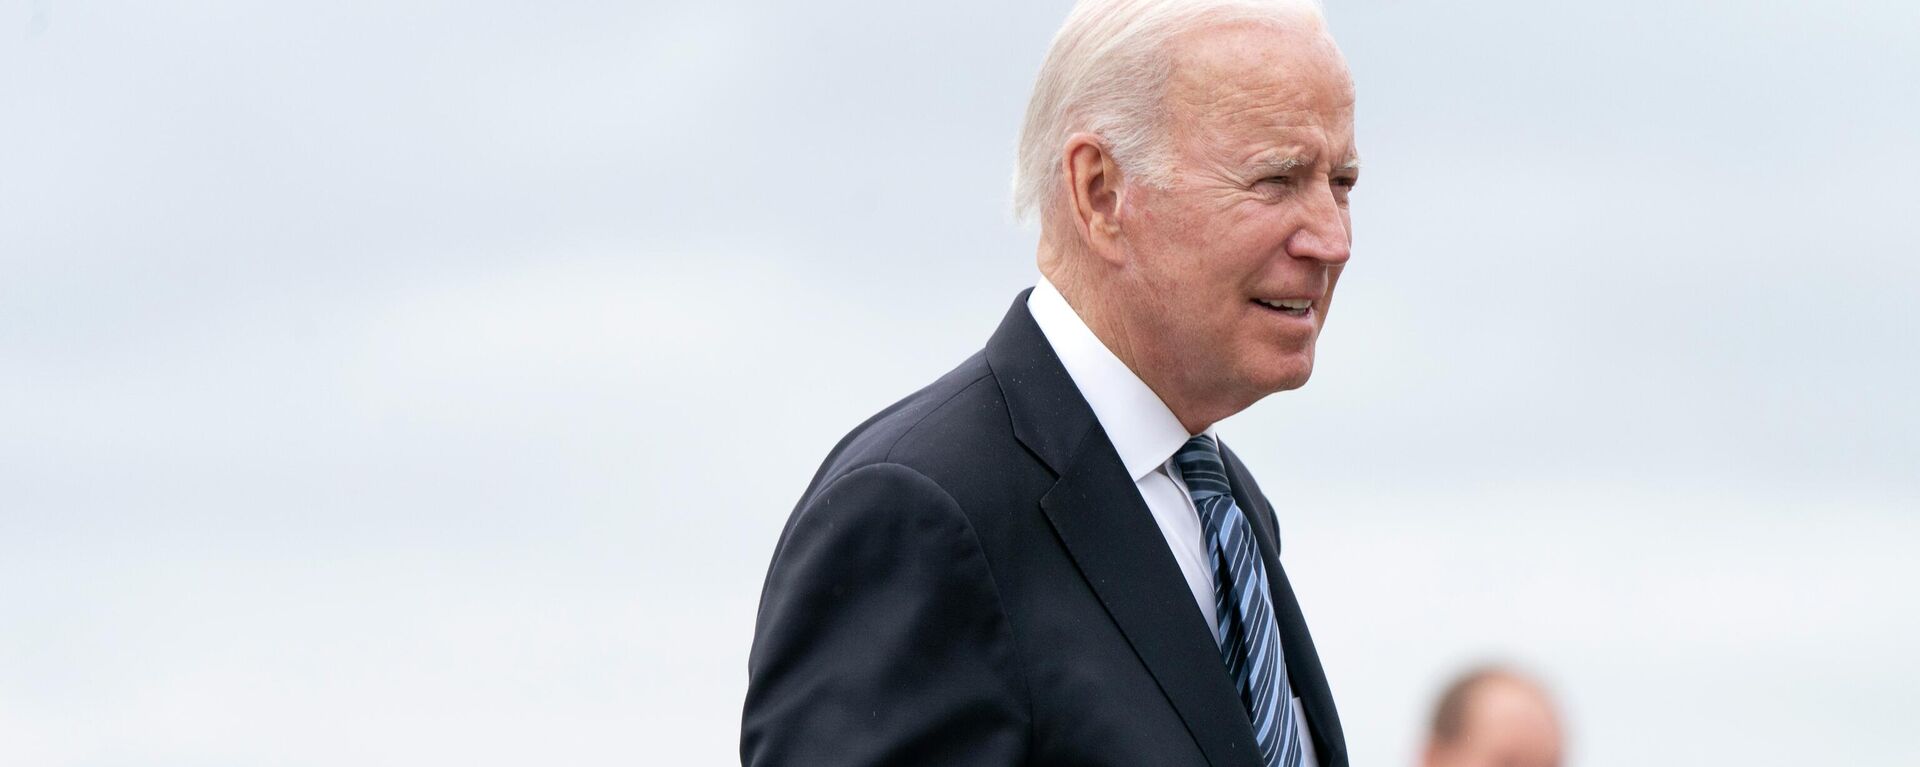 President Joe Biden responds to a reporter as he boards Air Force One at Minneapolis-St. Paul International Airport after attending the memorial service for former Vice President Walter Mondale, Sunday, May 1, 2022, in Minneapolis. - Sputnik International, 1920, 31.05.2022